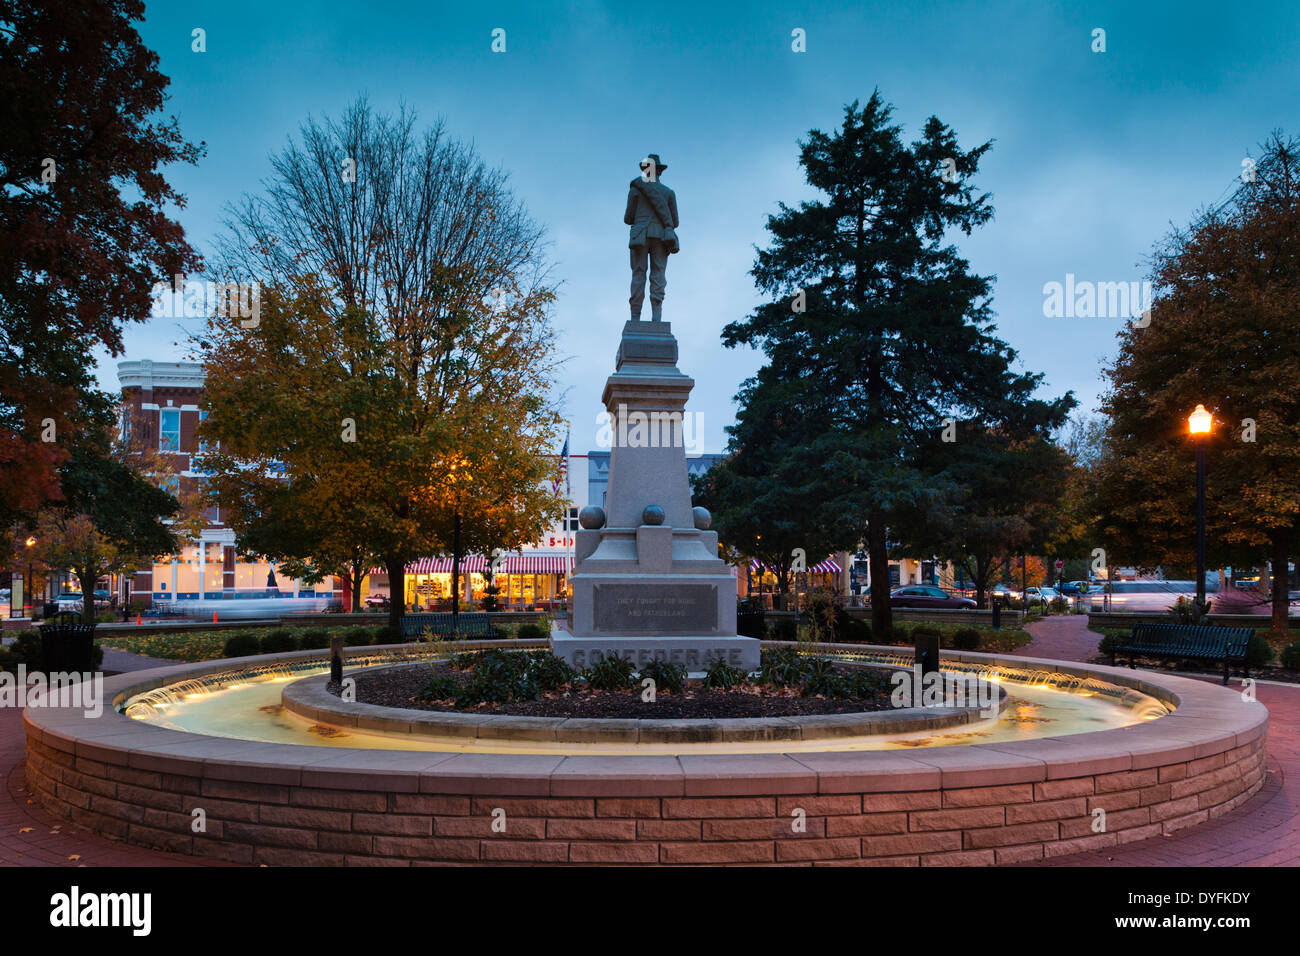 Bentonville Arkansas High Resolution Stock Photography And Images Alamy